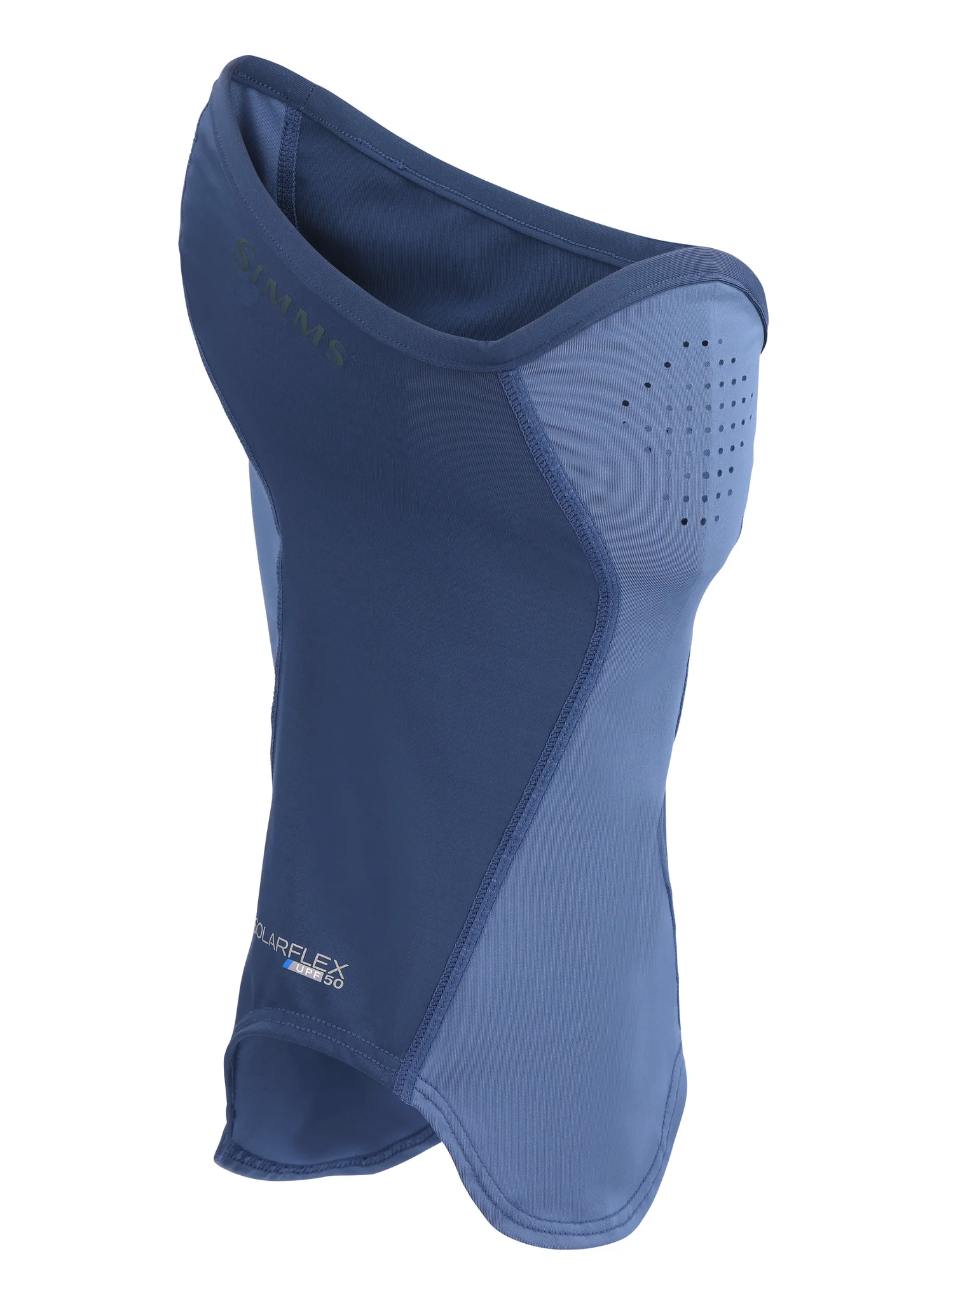 https://www.theflyfishers.com/Content/files/Simms/SunProtection/Sungaiter/Neptune.png